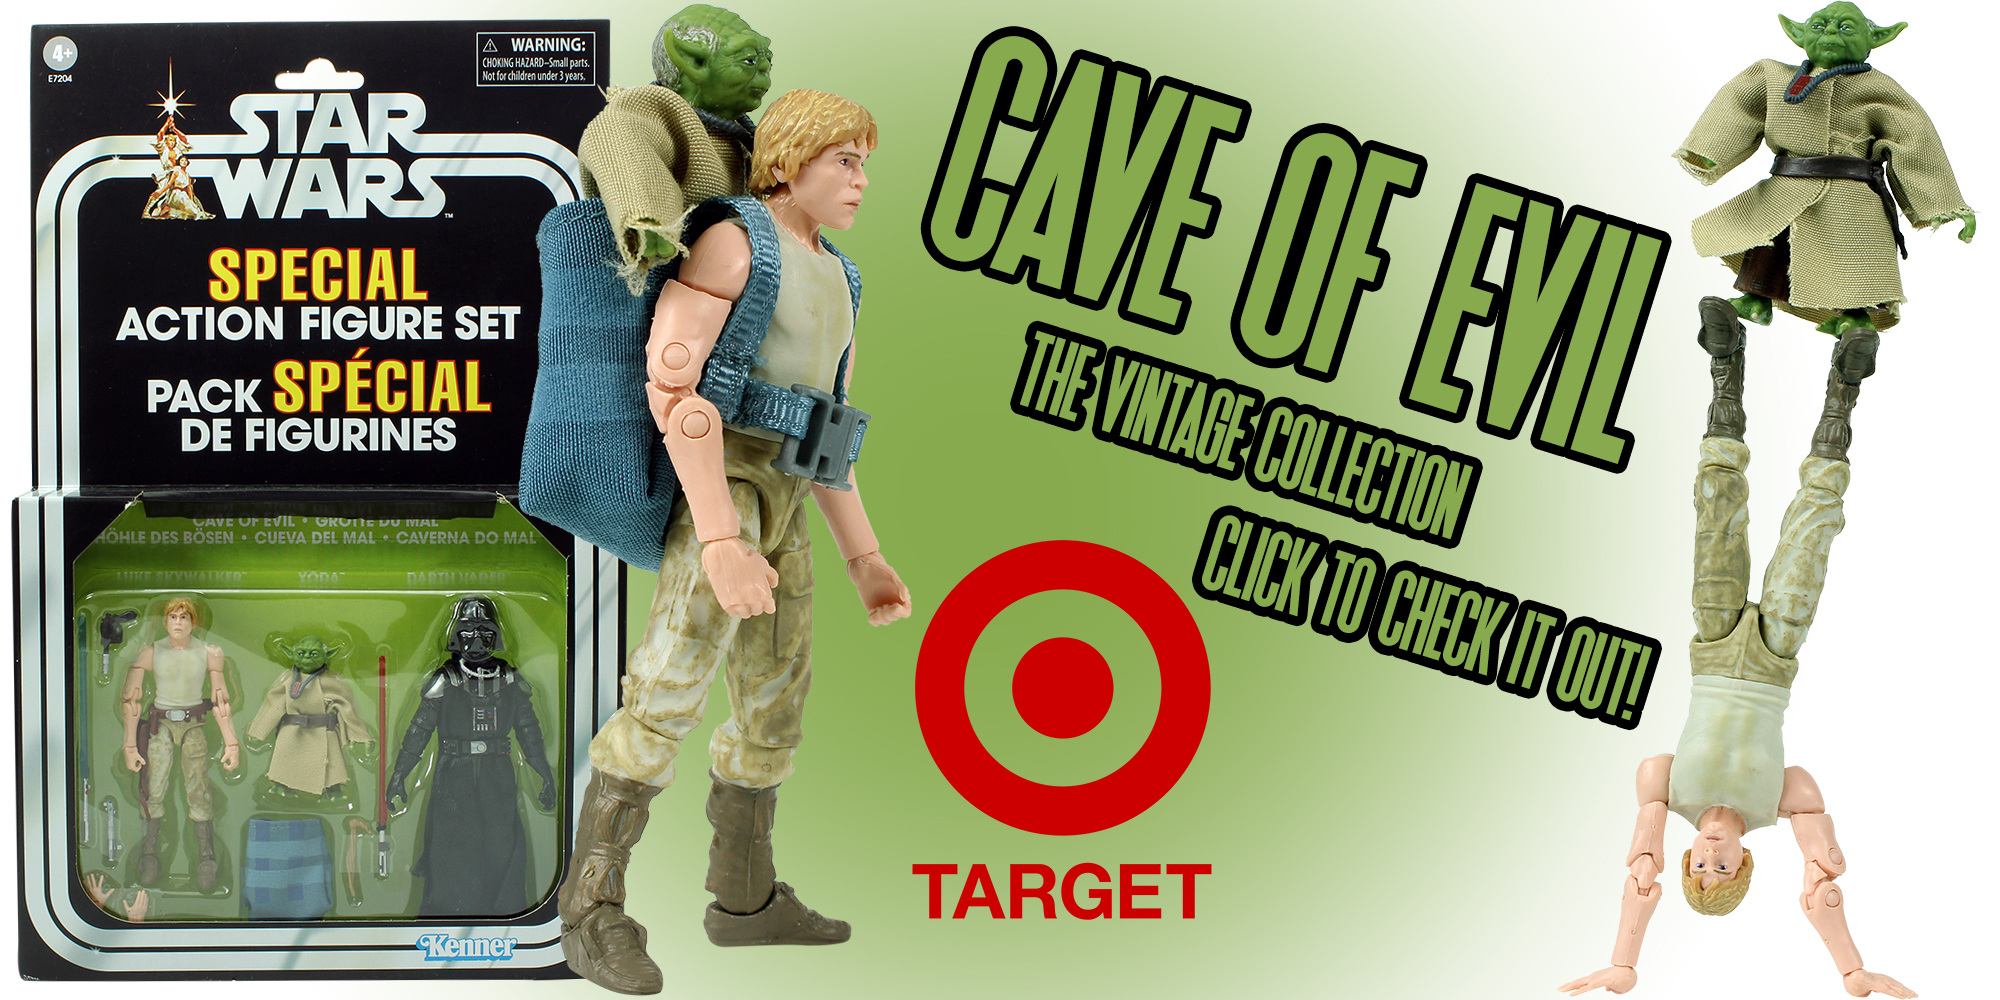 Learn More About The Cave Of Evil 3-Pack!